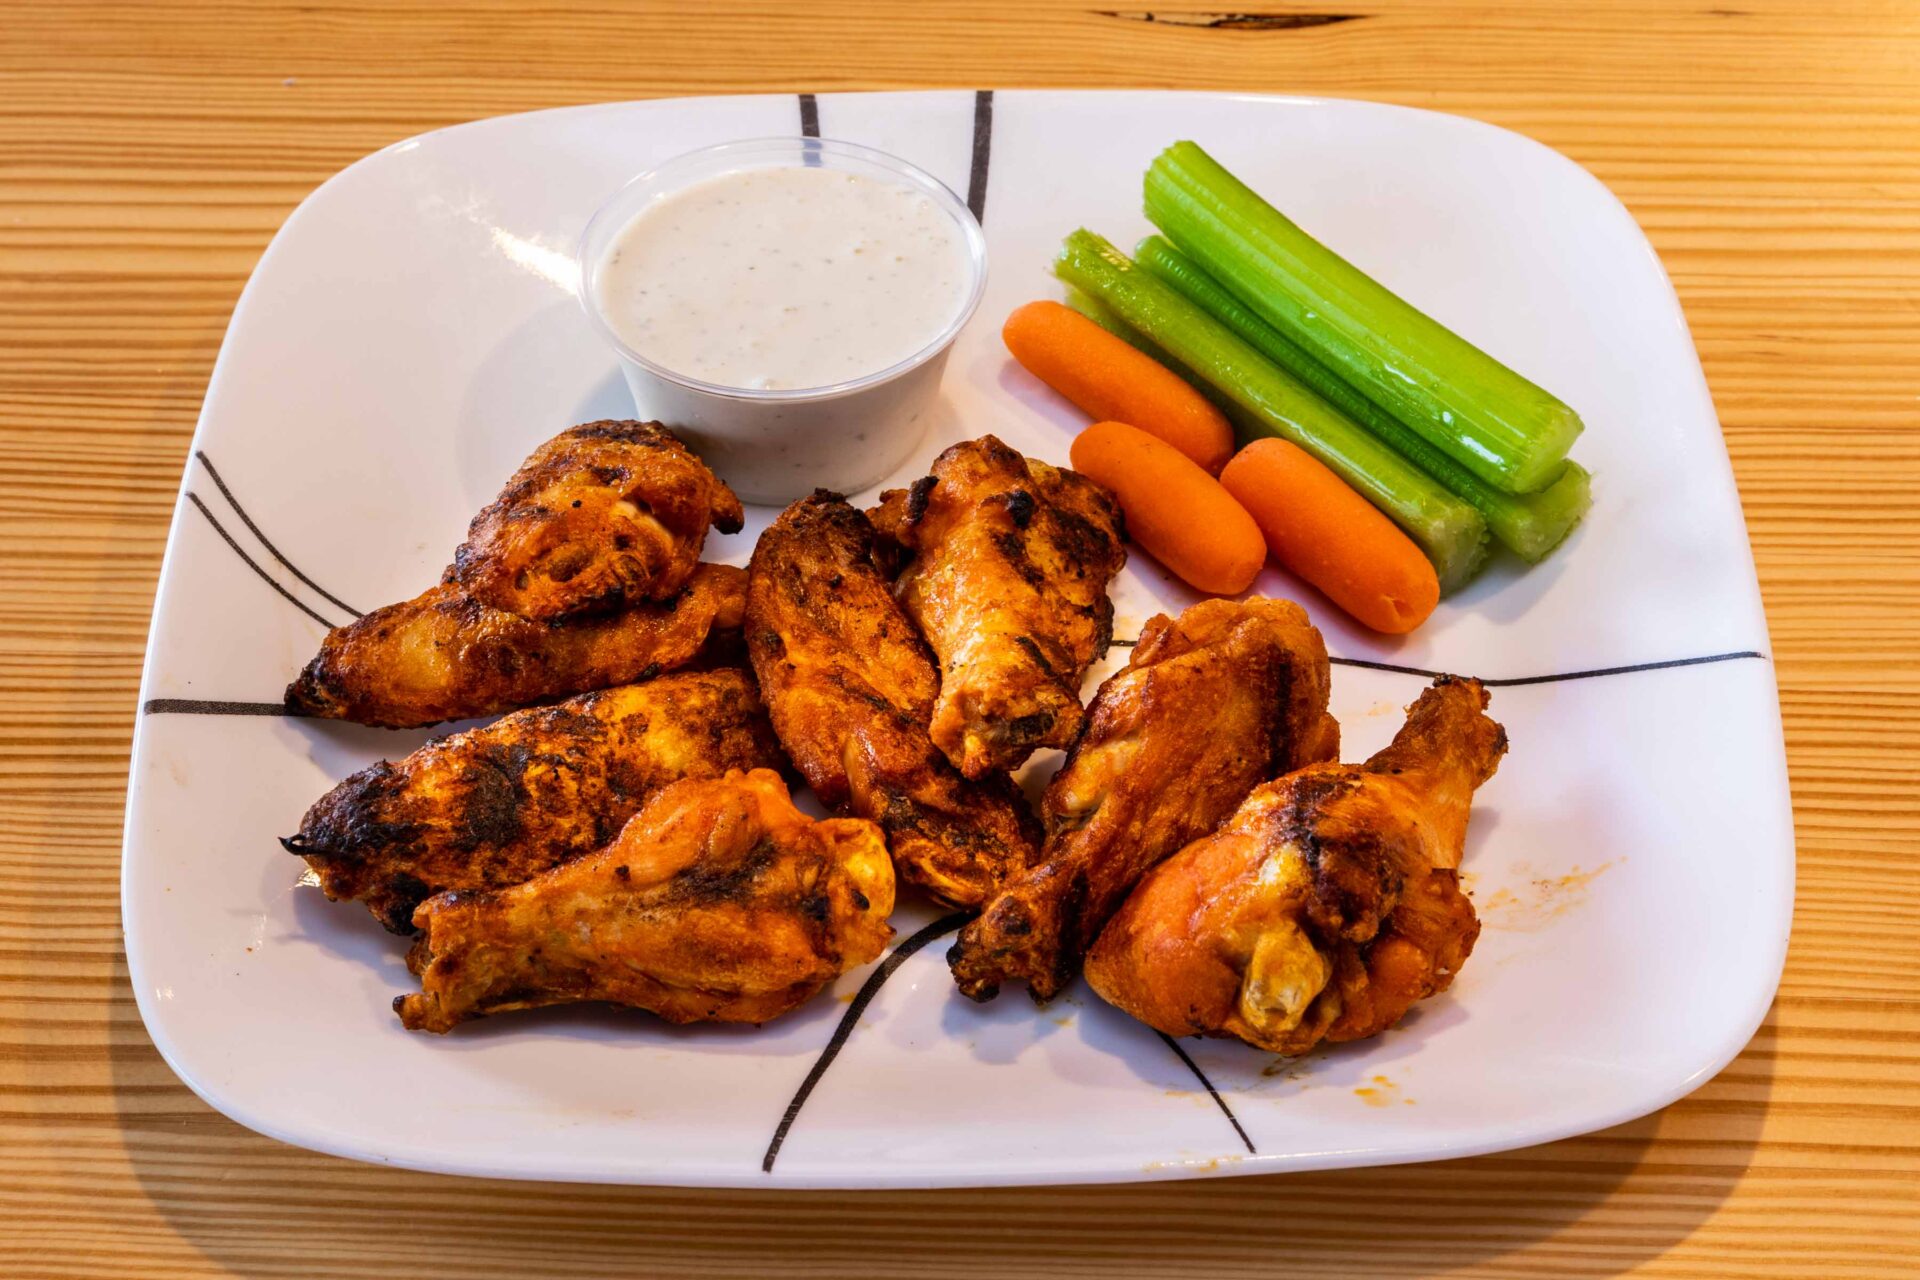 A plate of chicken wings and vegetables on the table.